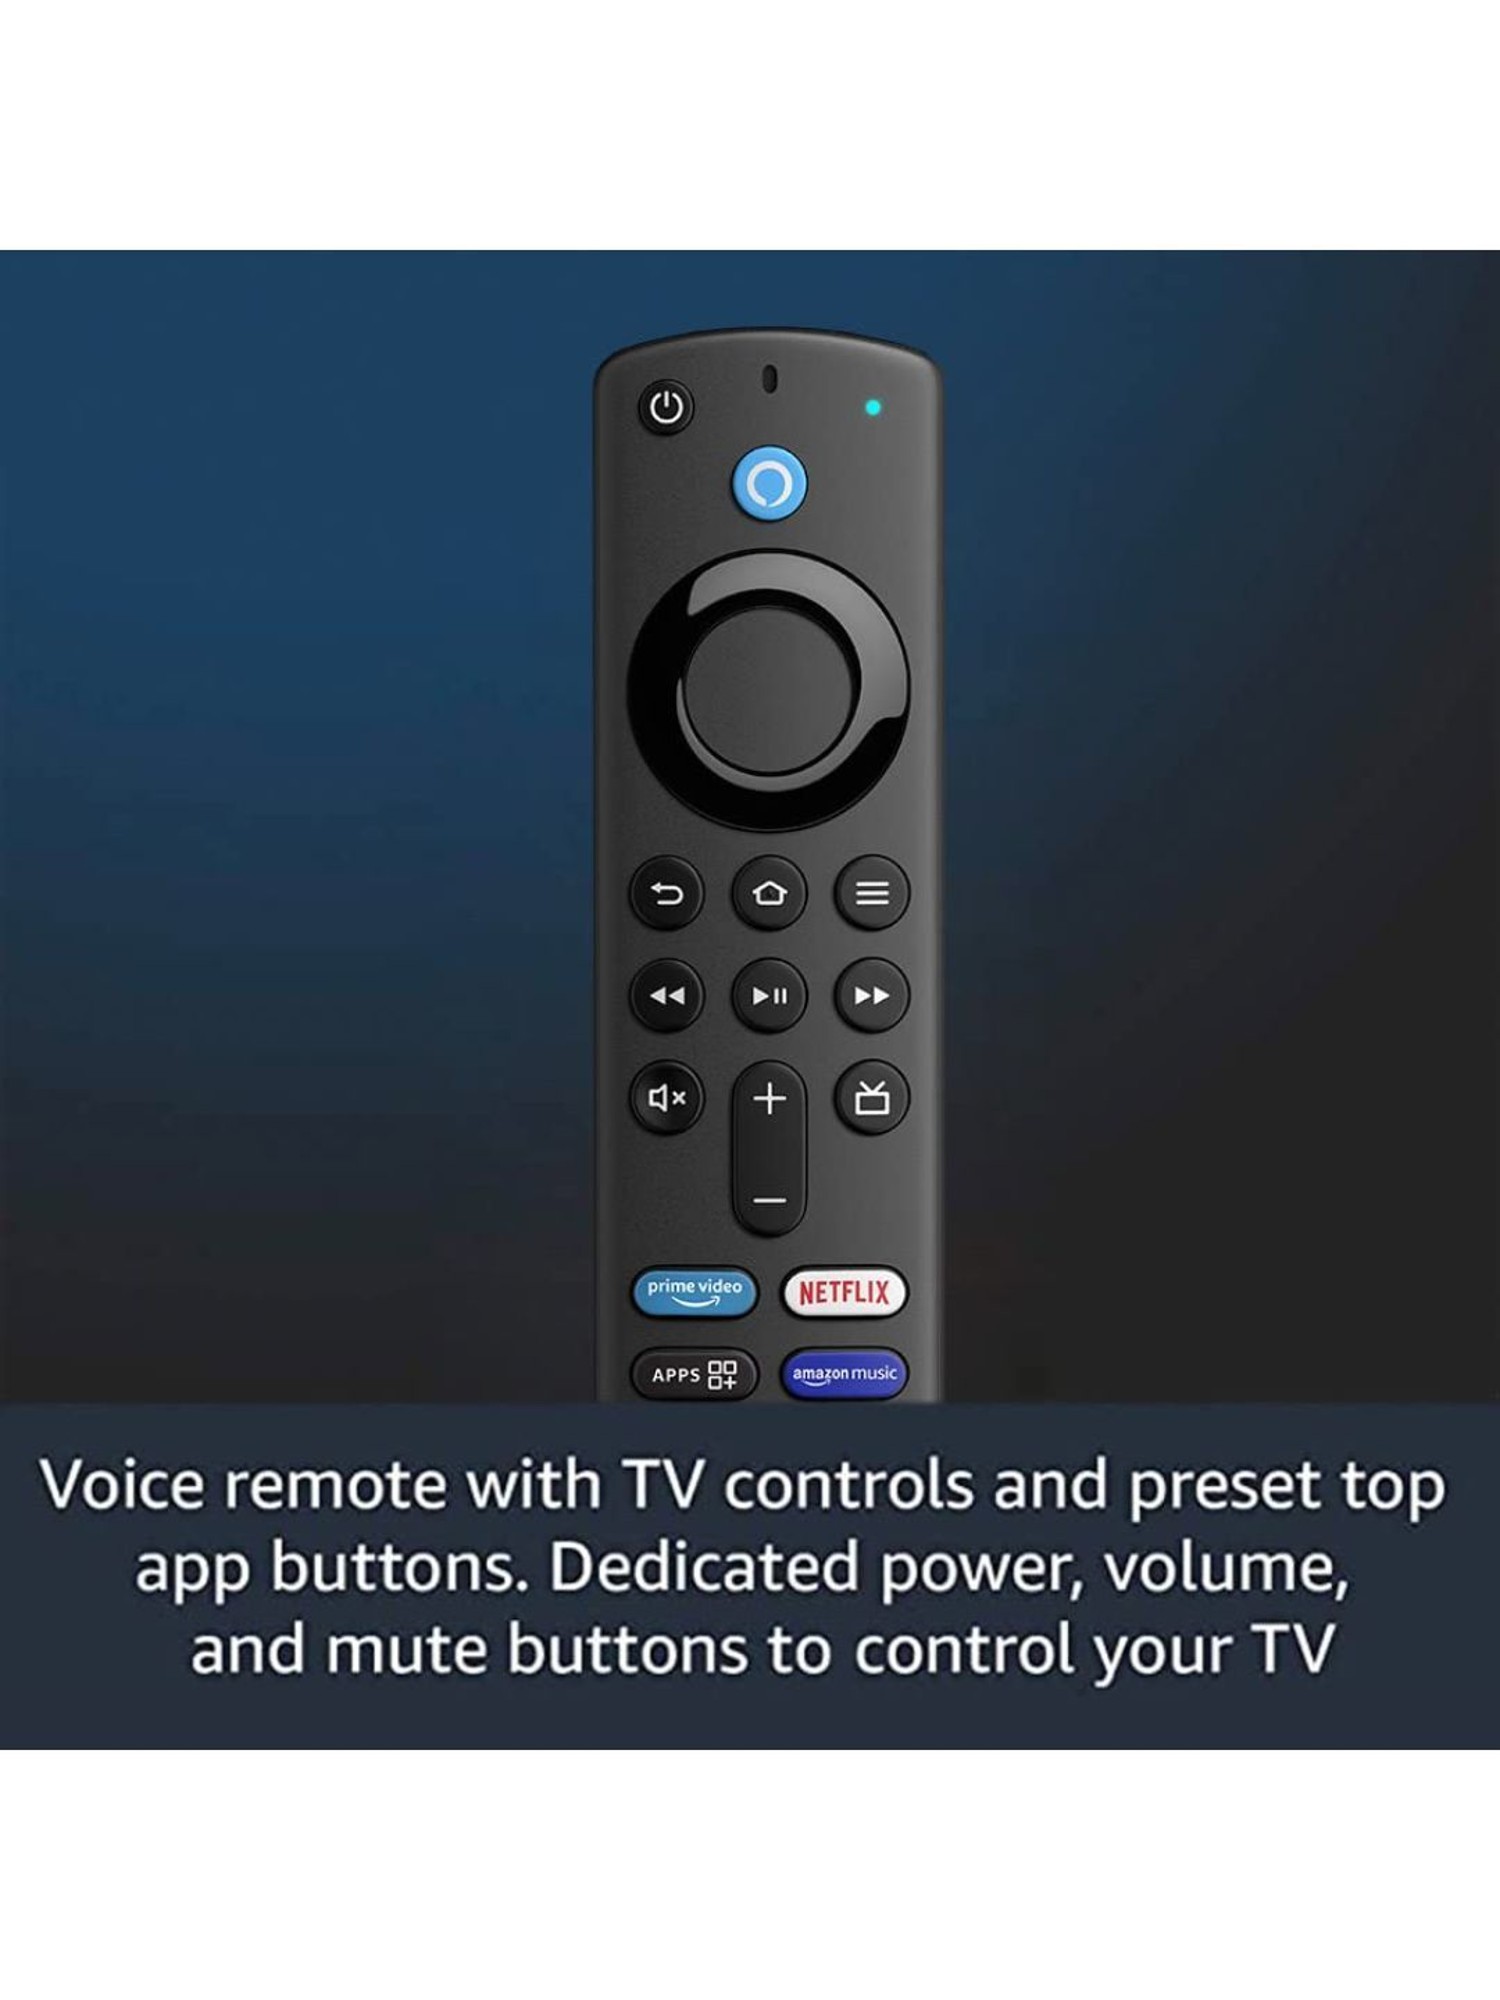 Buy  Fire TV Stick 4K and Remote Control with Alexa Online